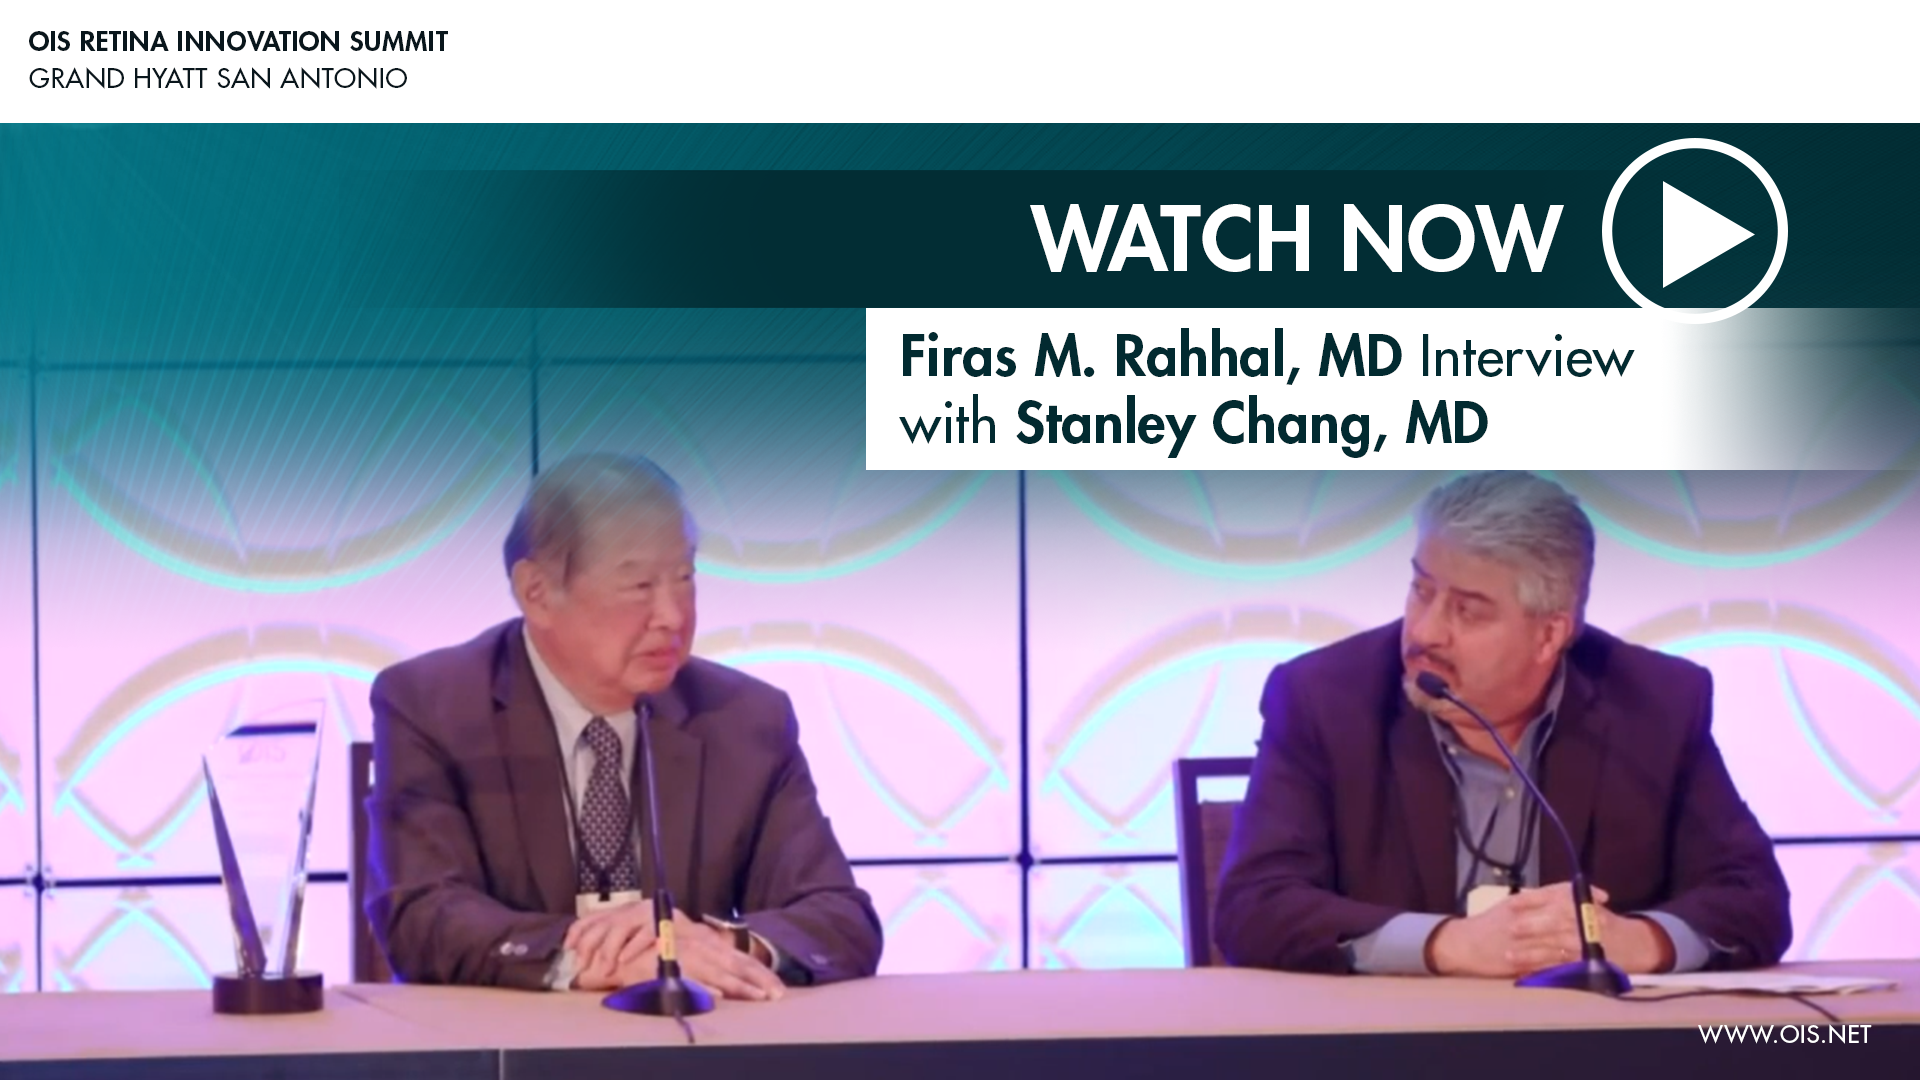 Firas M. Rahhal, MD Interview with Stanley Chang, MD